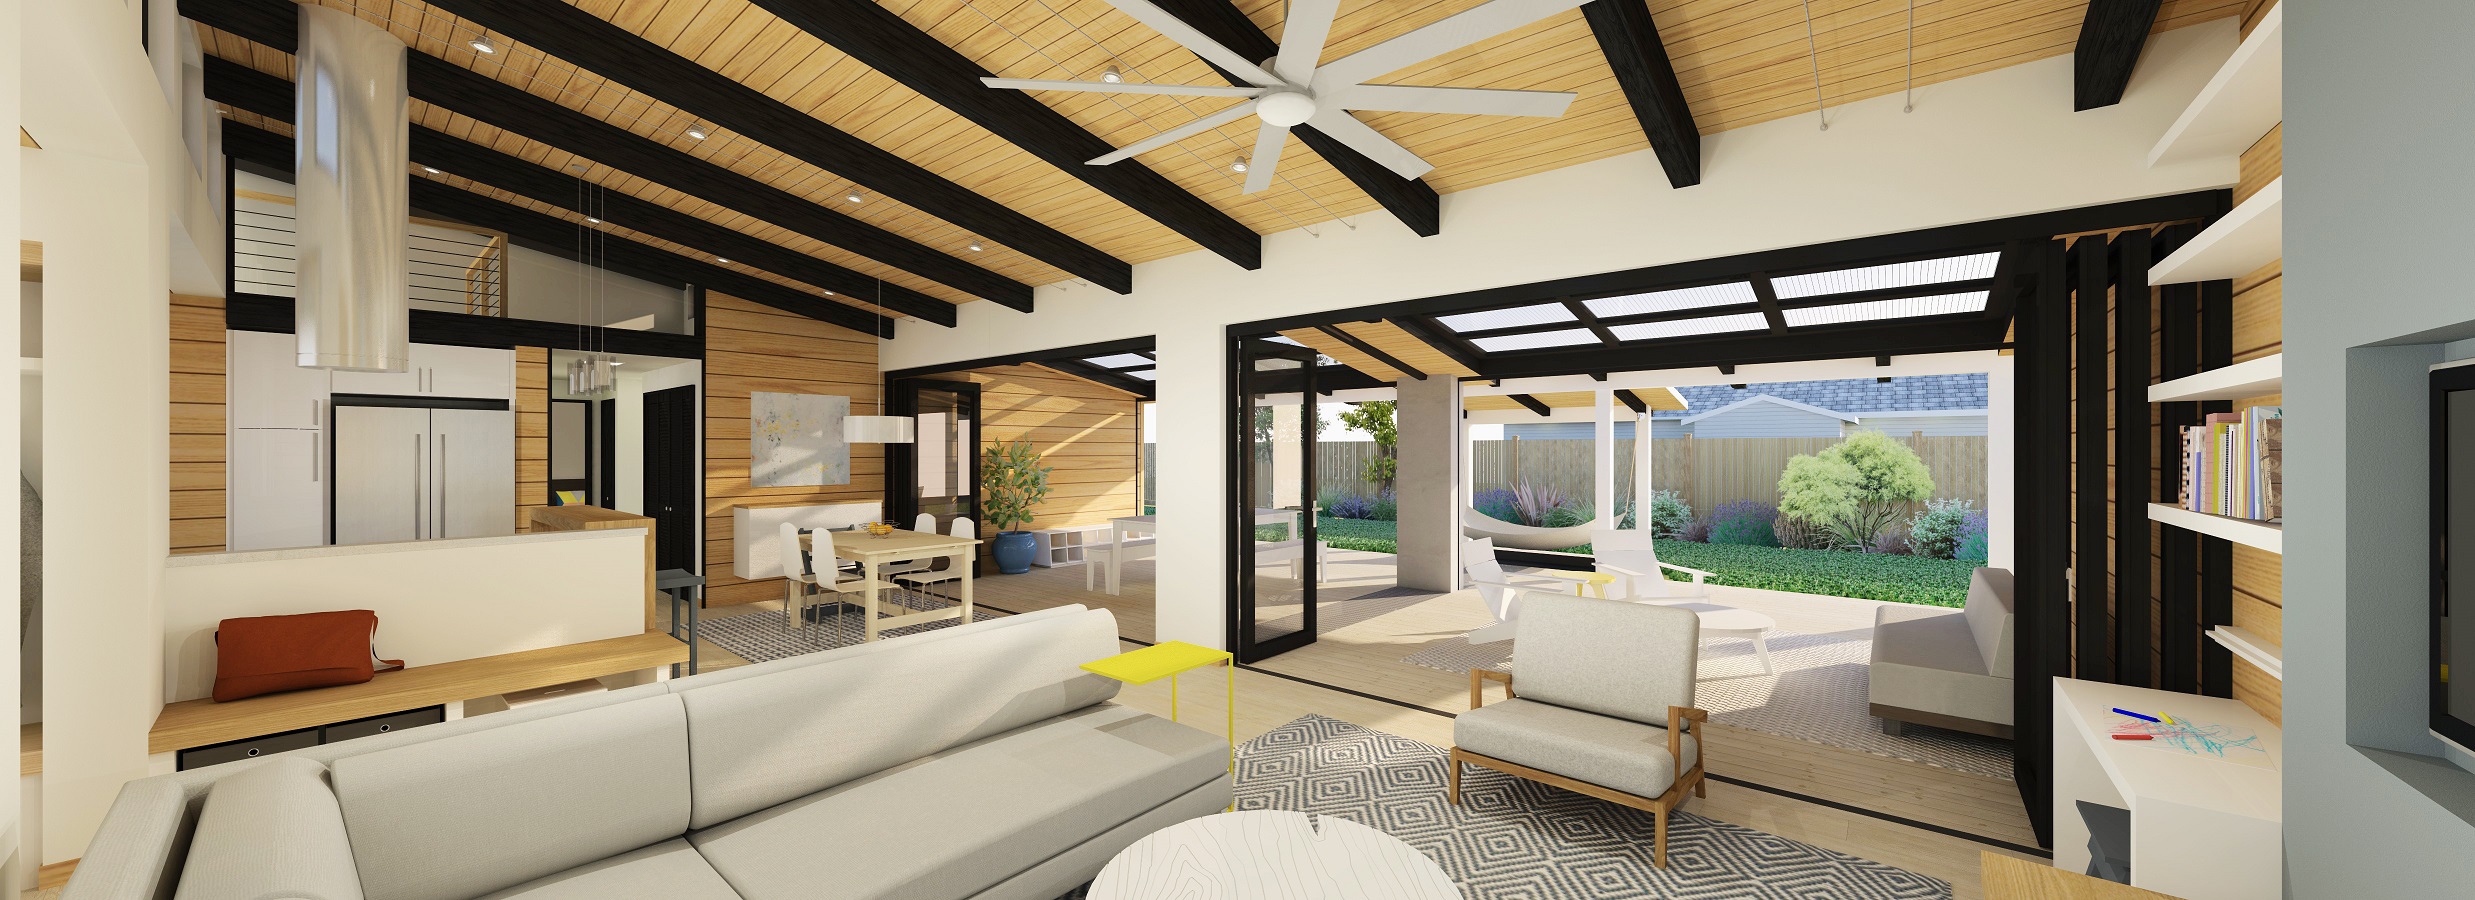 Graphic of a modern indoor living area that opens to the outside.